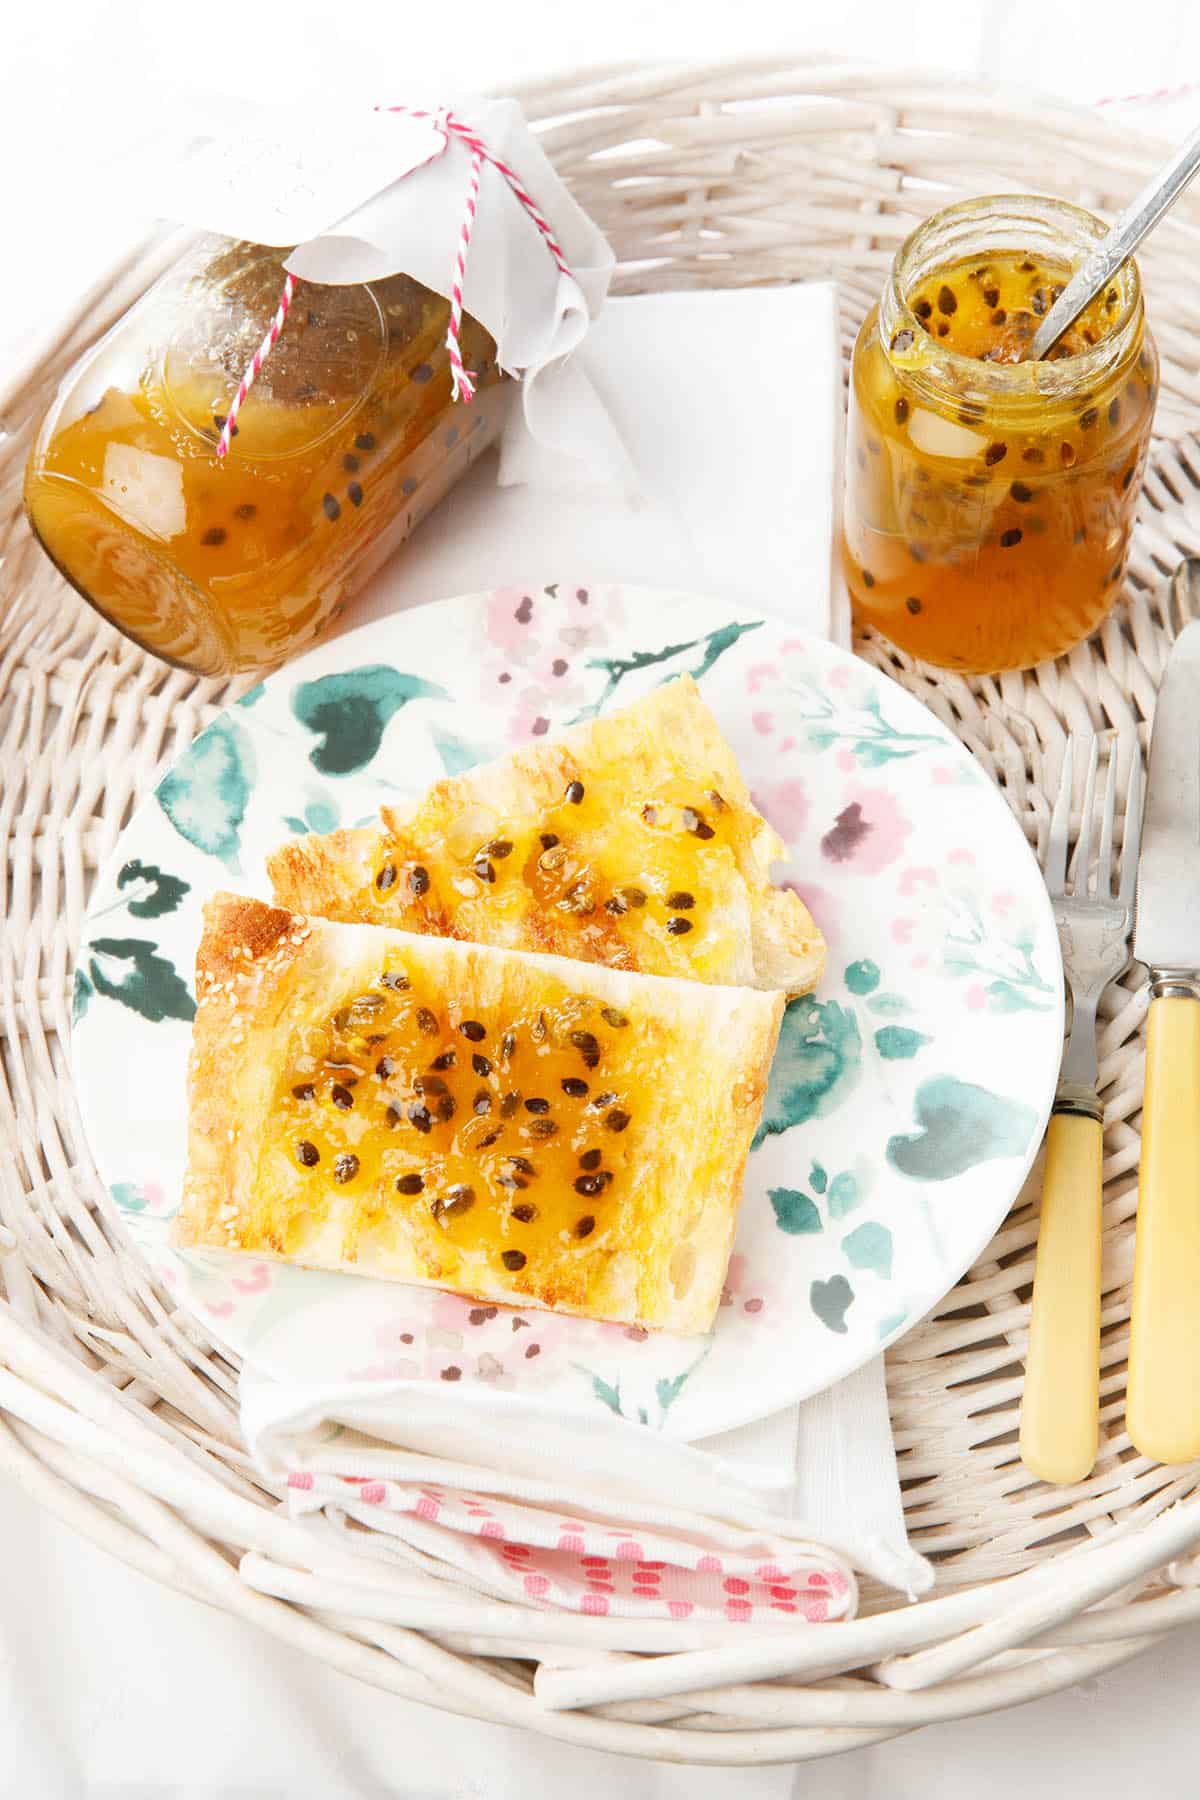 Homemade Thermomix Passionfruit Jam